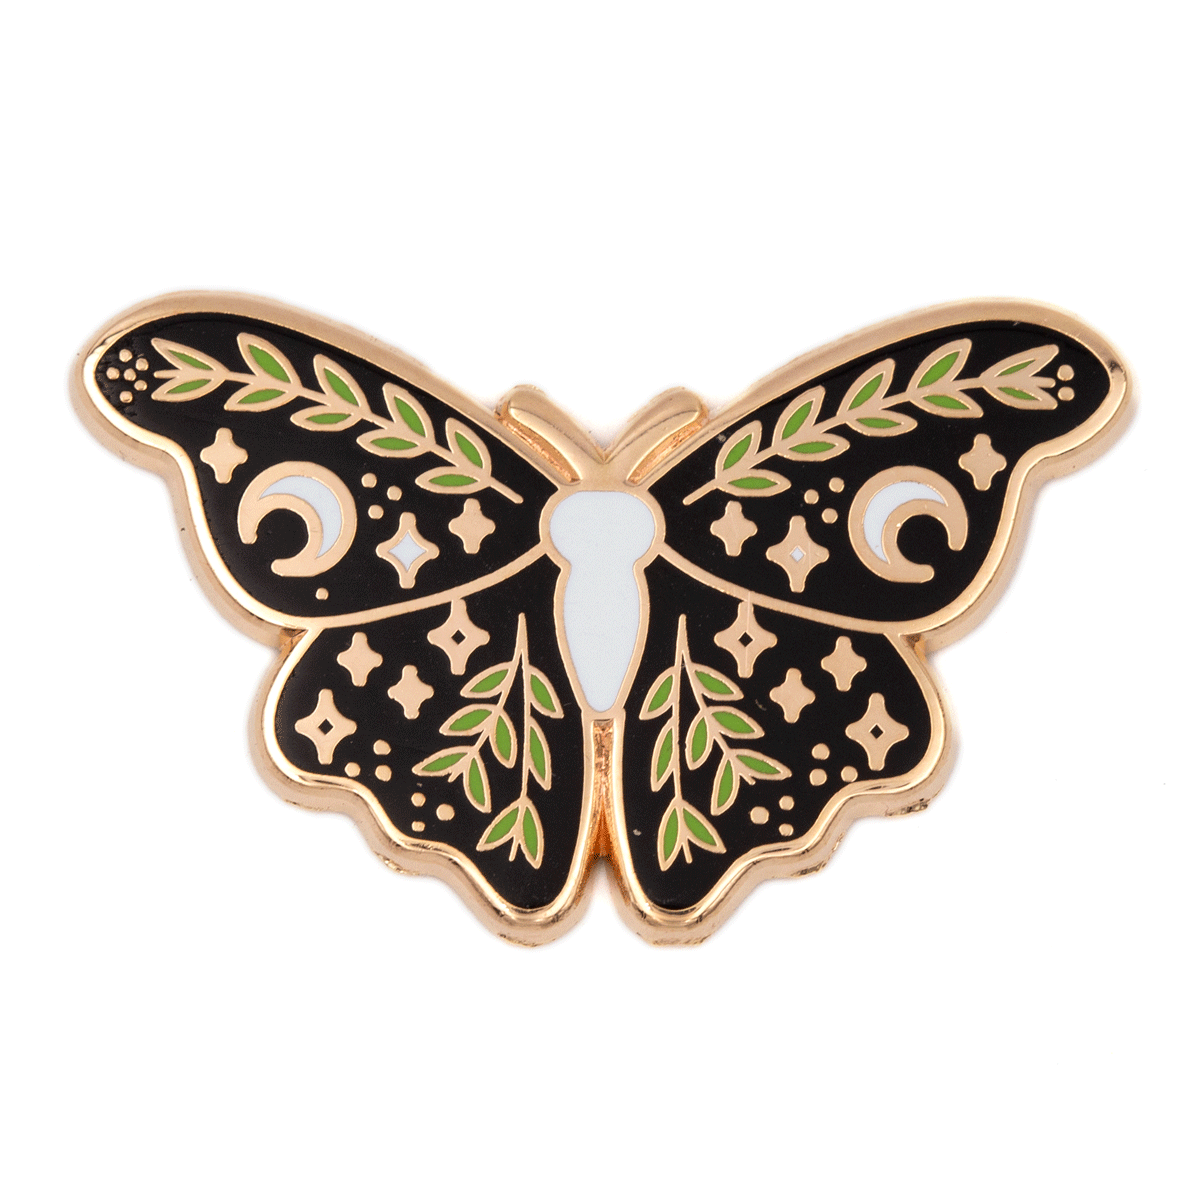 These Are Things - Lunar Floral Moth Enamel Pin